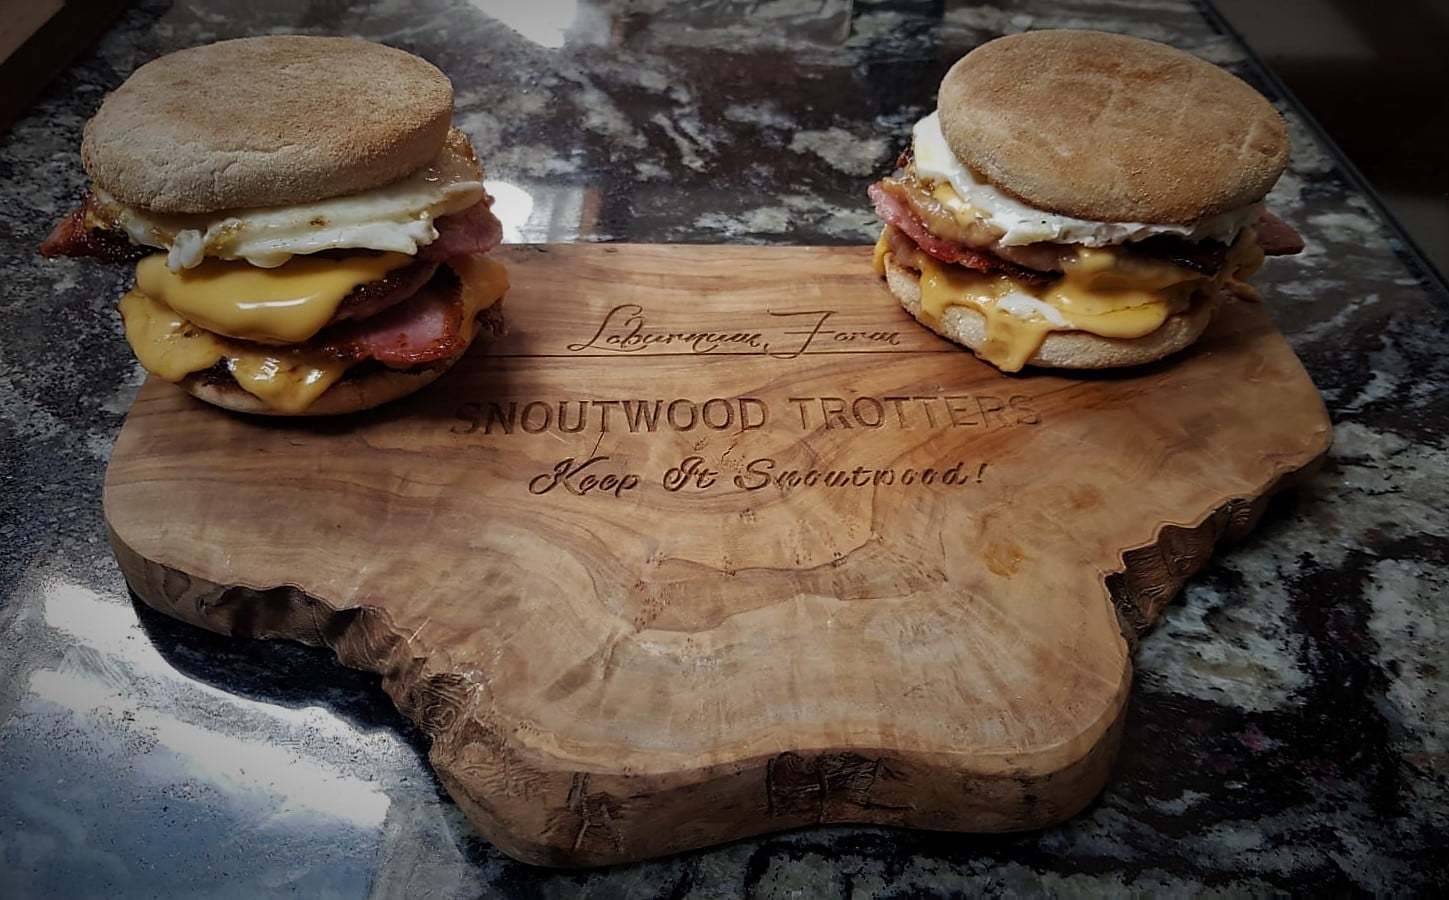 Snoutwood bacon and egg rolls (Snoutwood)